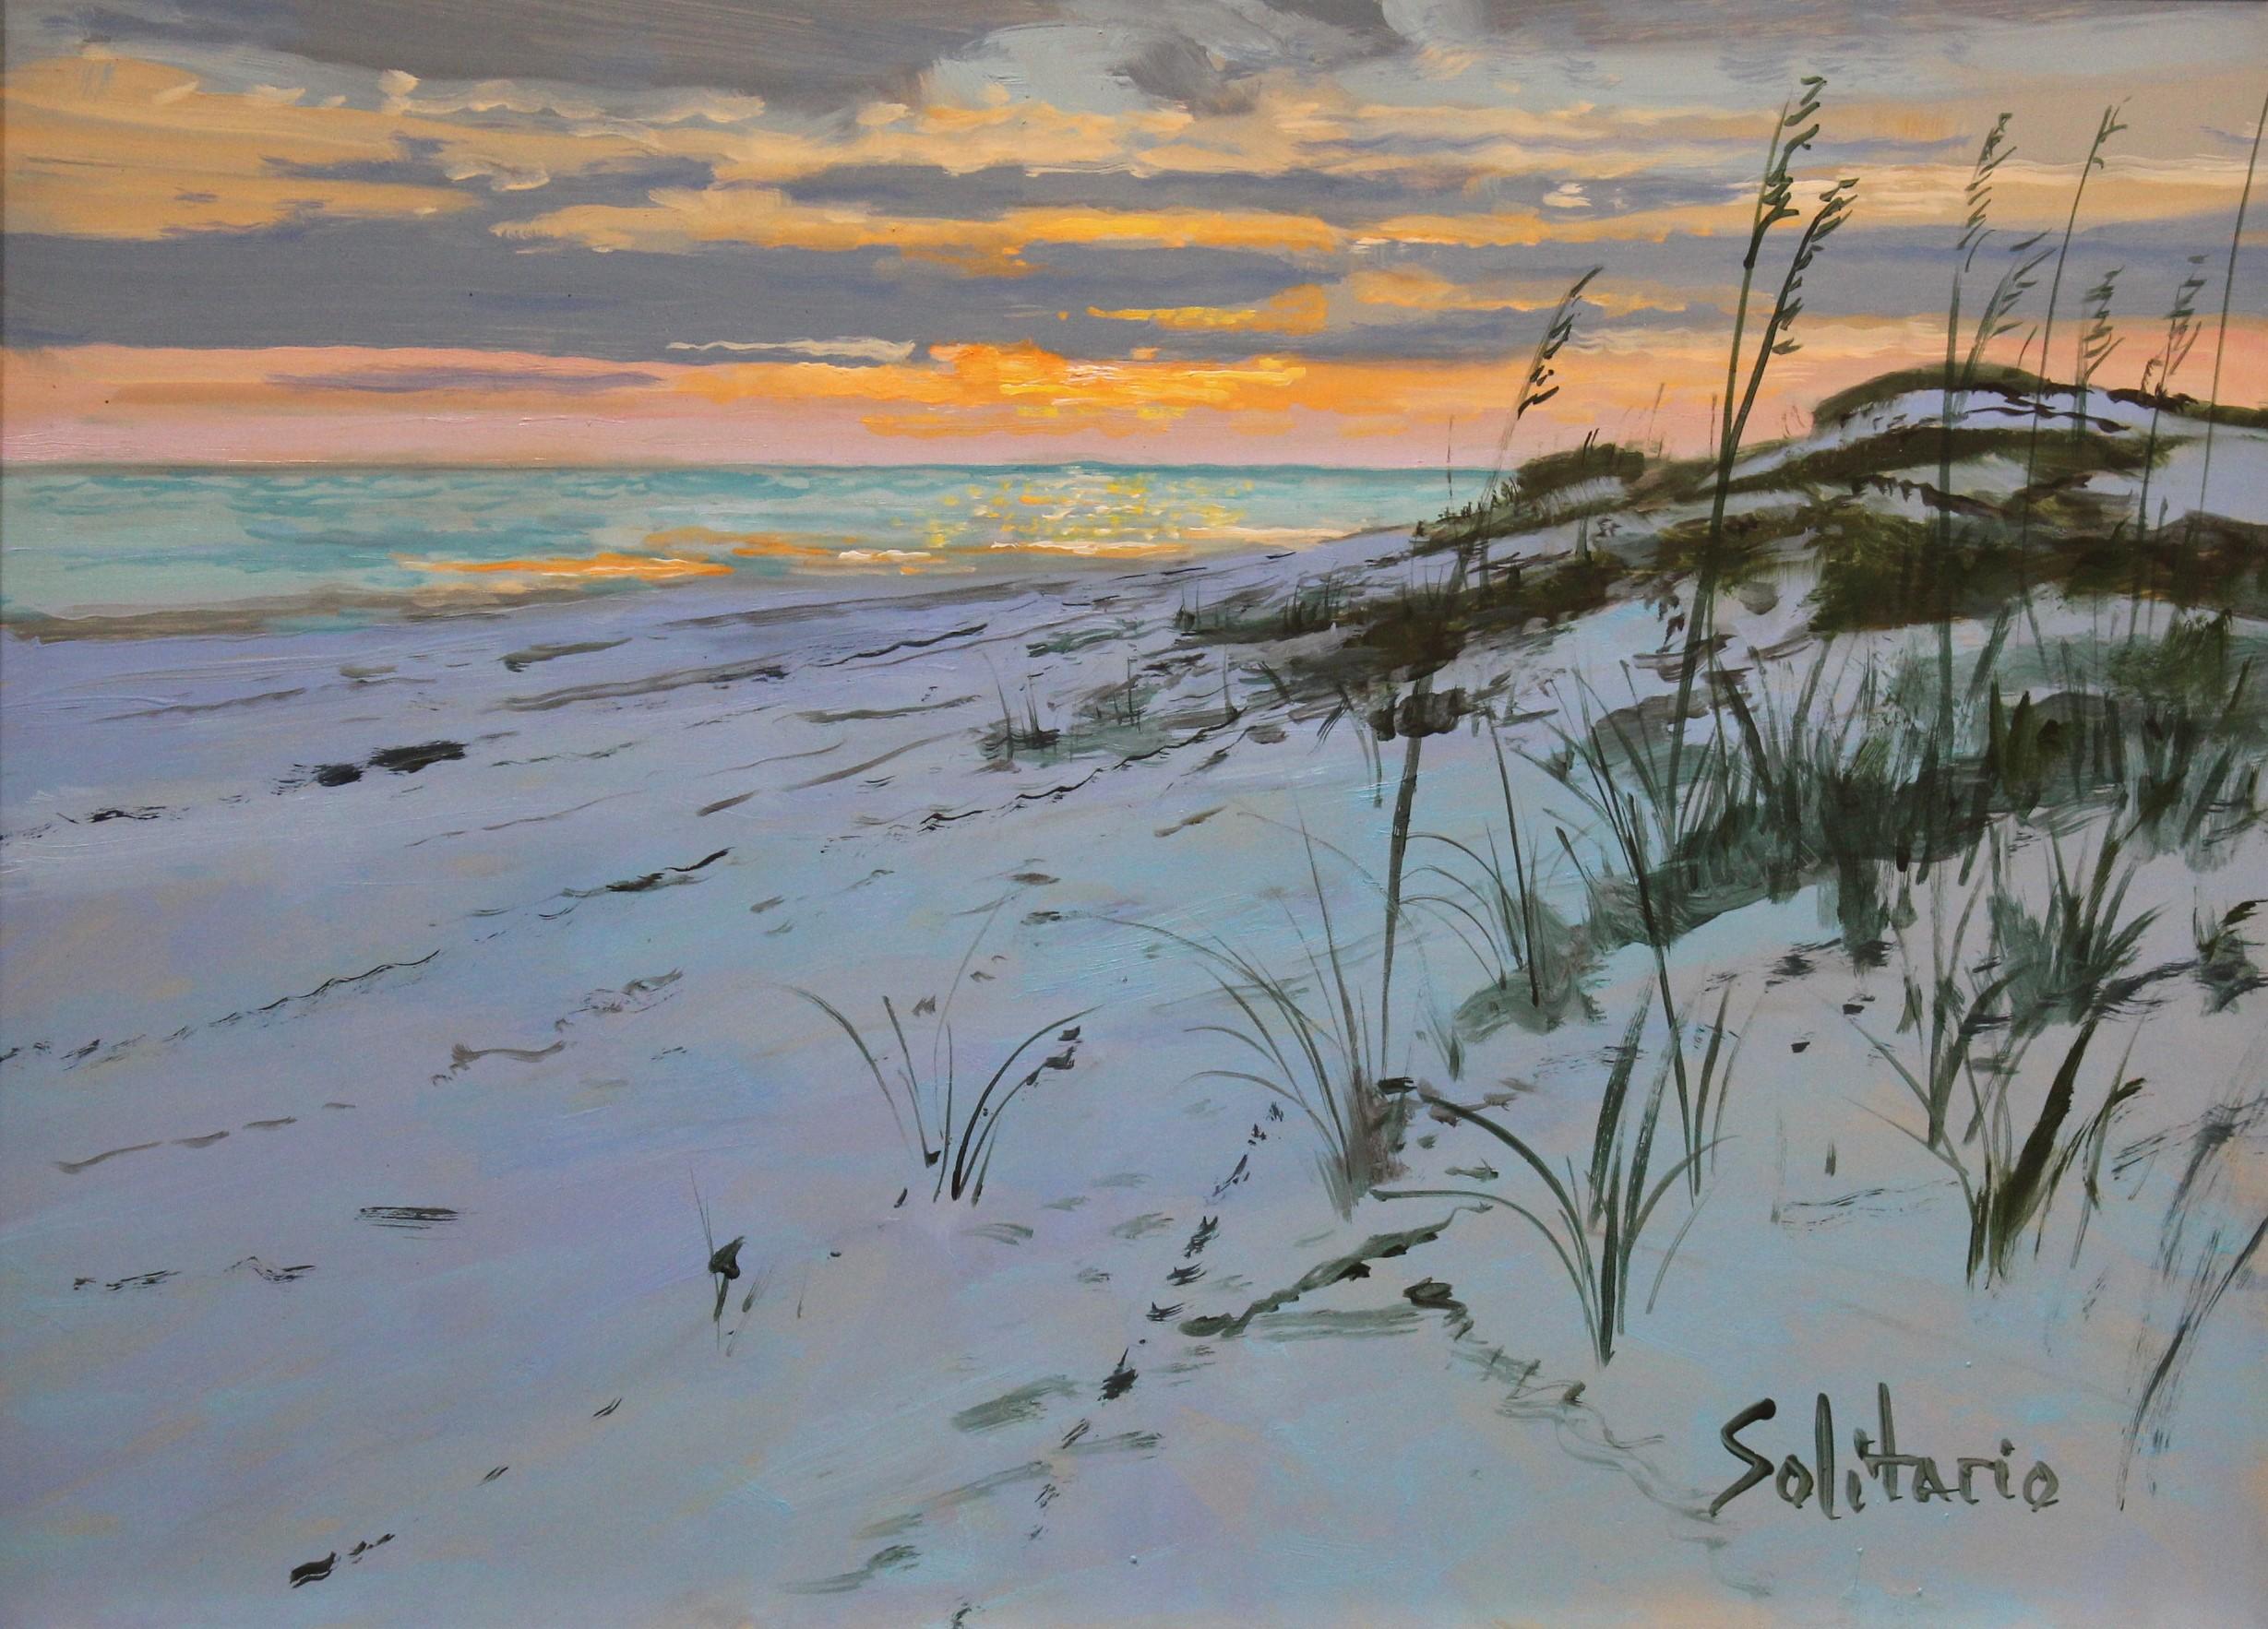 Billy Solitario Landscape Painting - Sunset Southside Horn Island